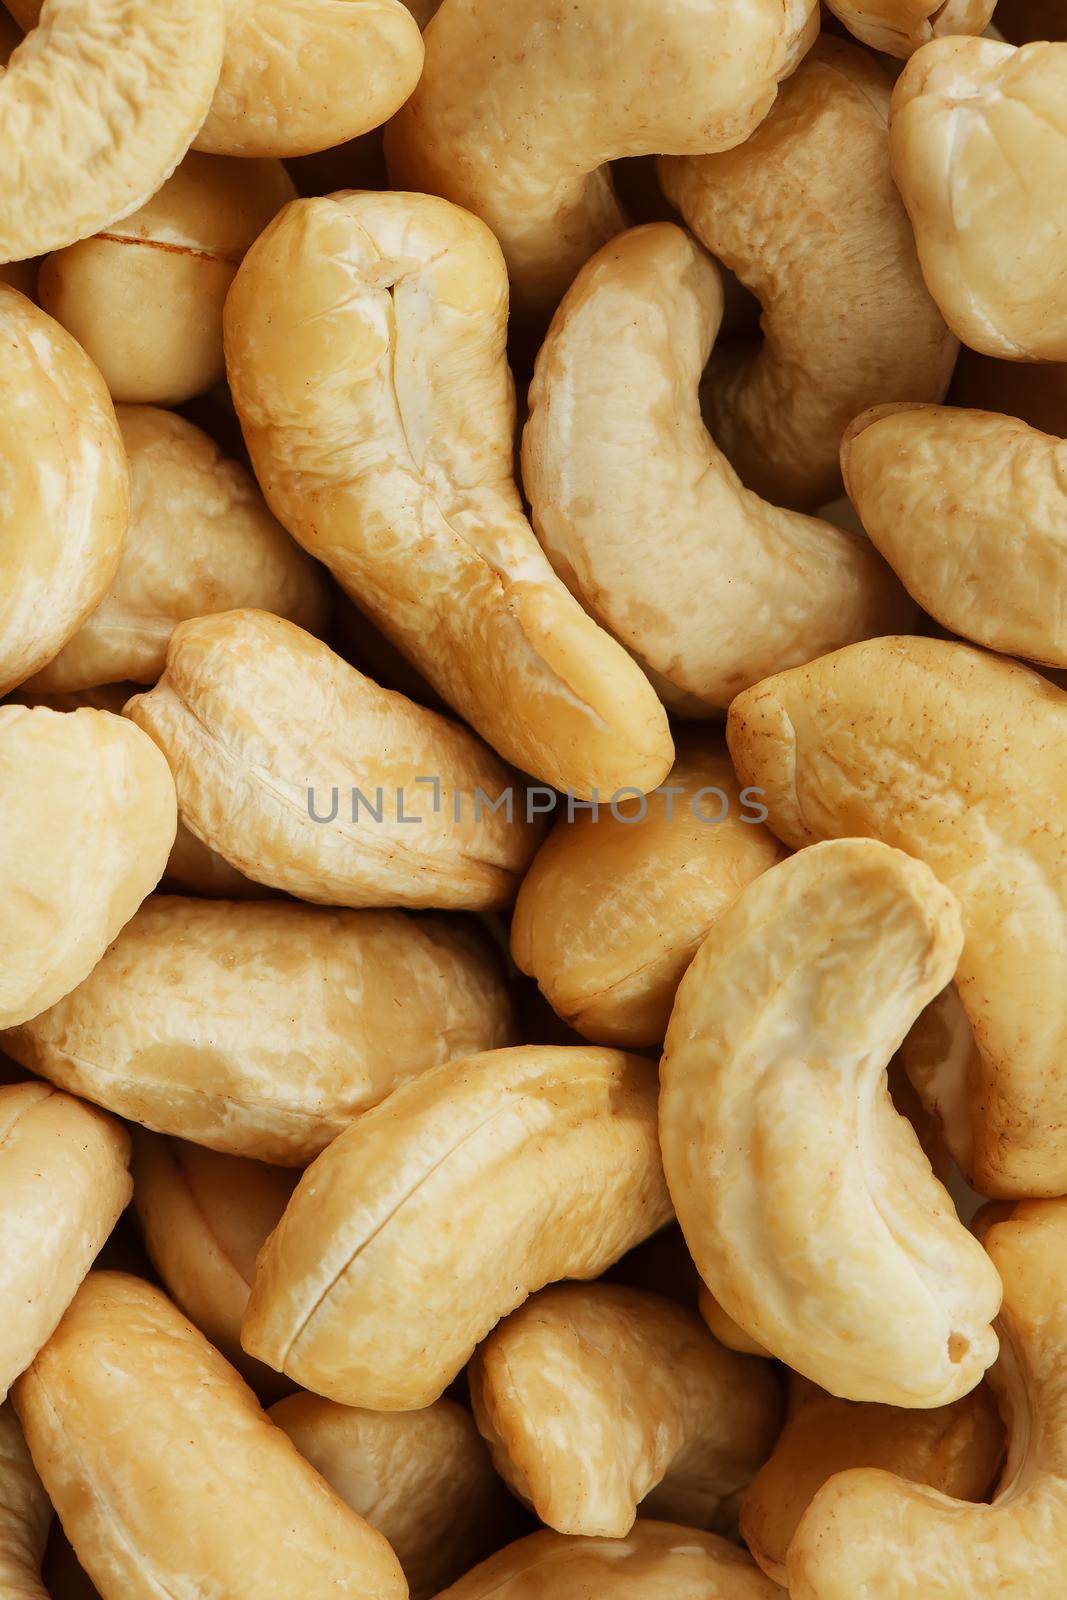 Organic Cashew with no shell on a background by AlexGrec